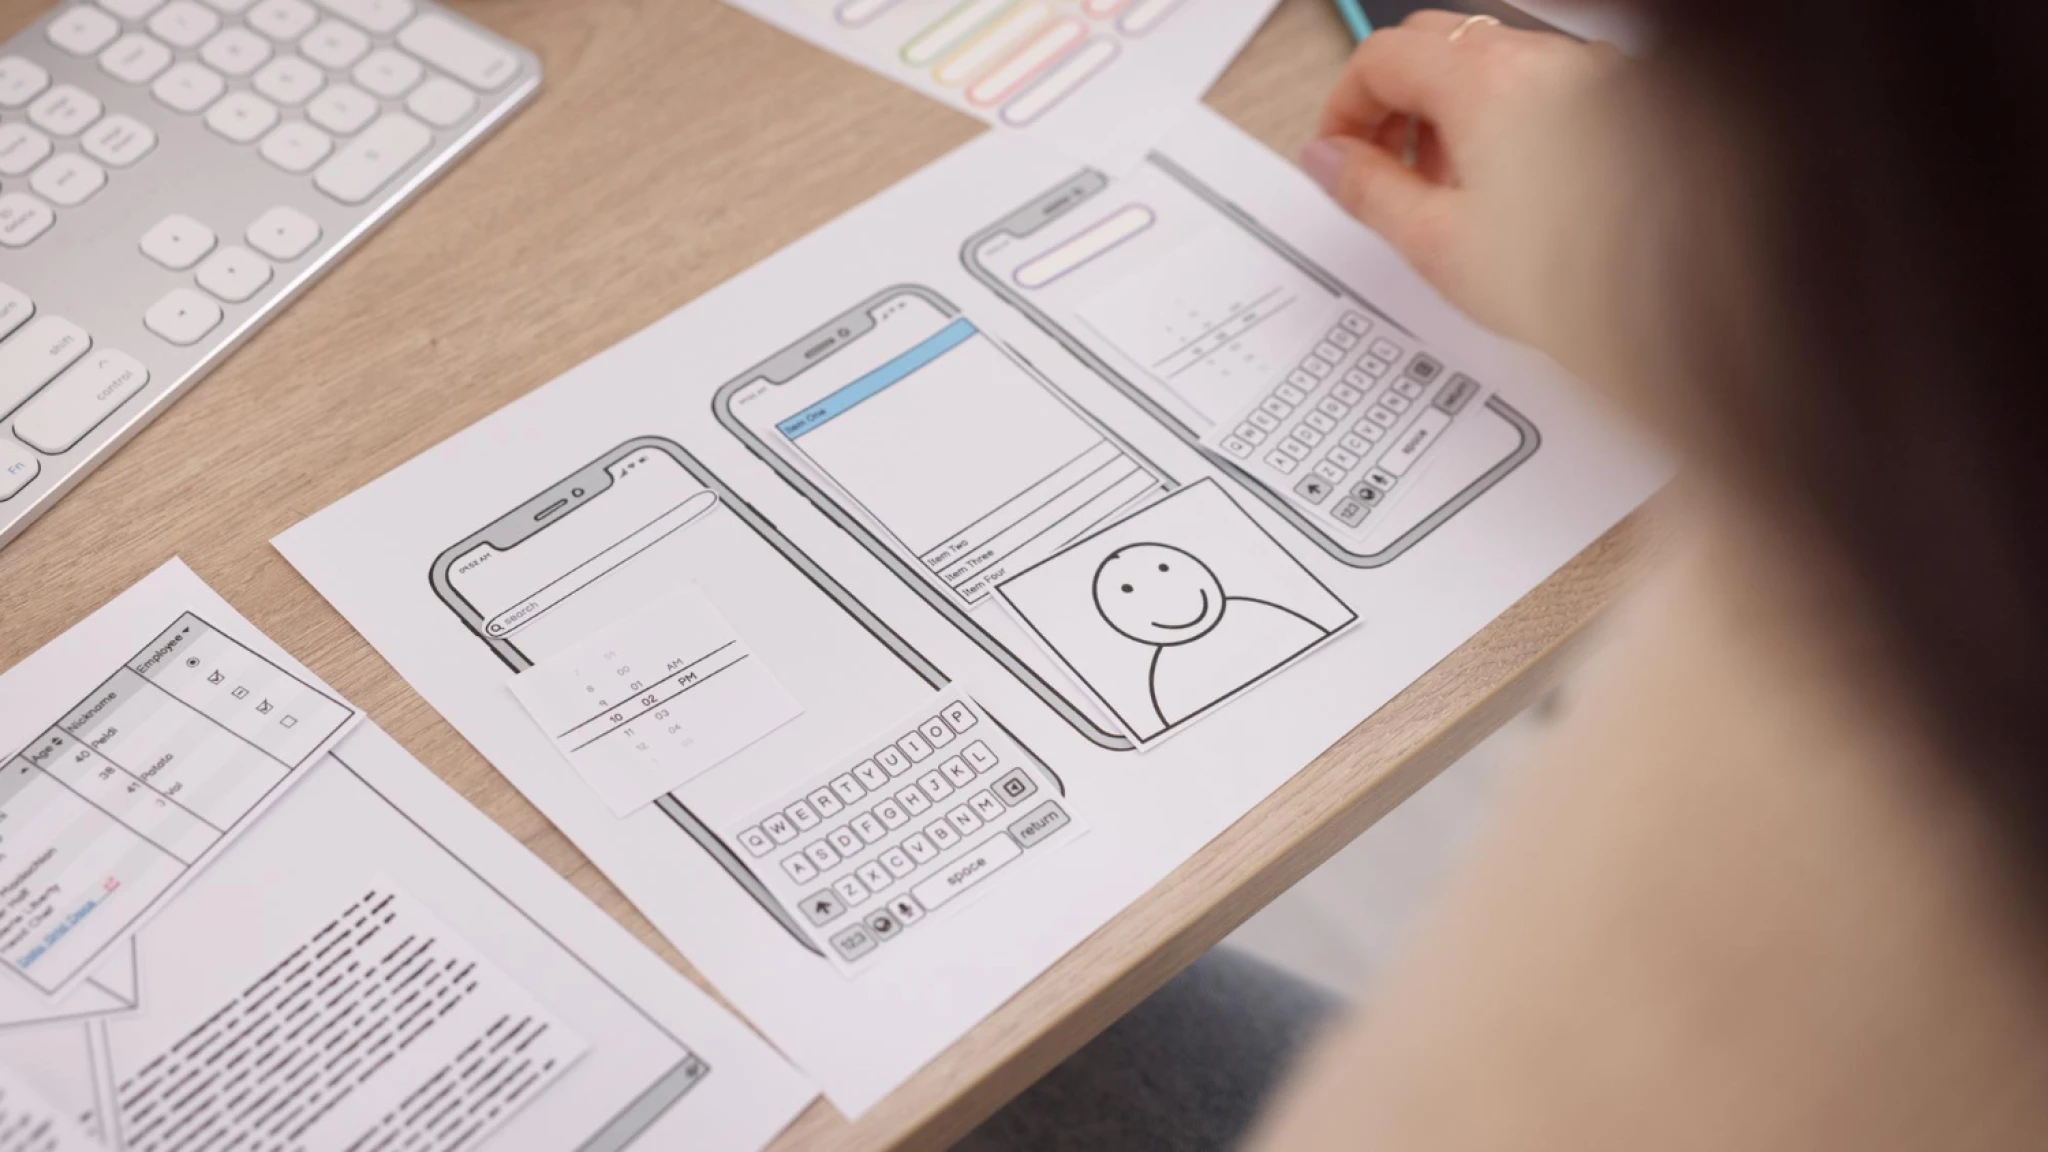 Design Essentials: Prototyping and Wireframing in UX